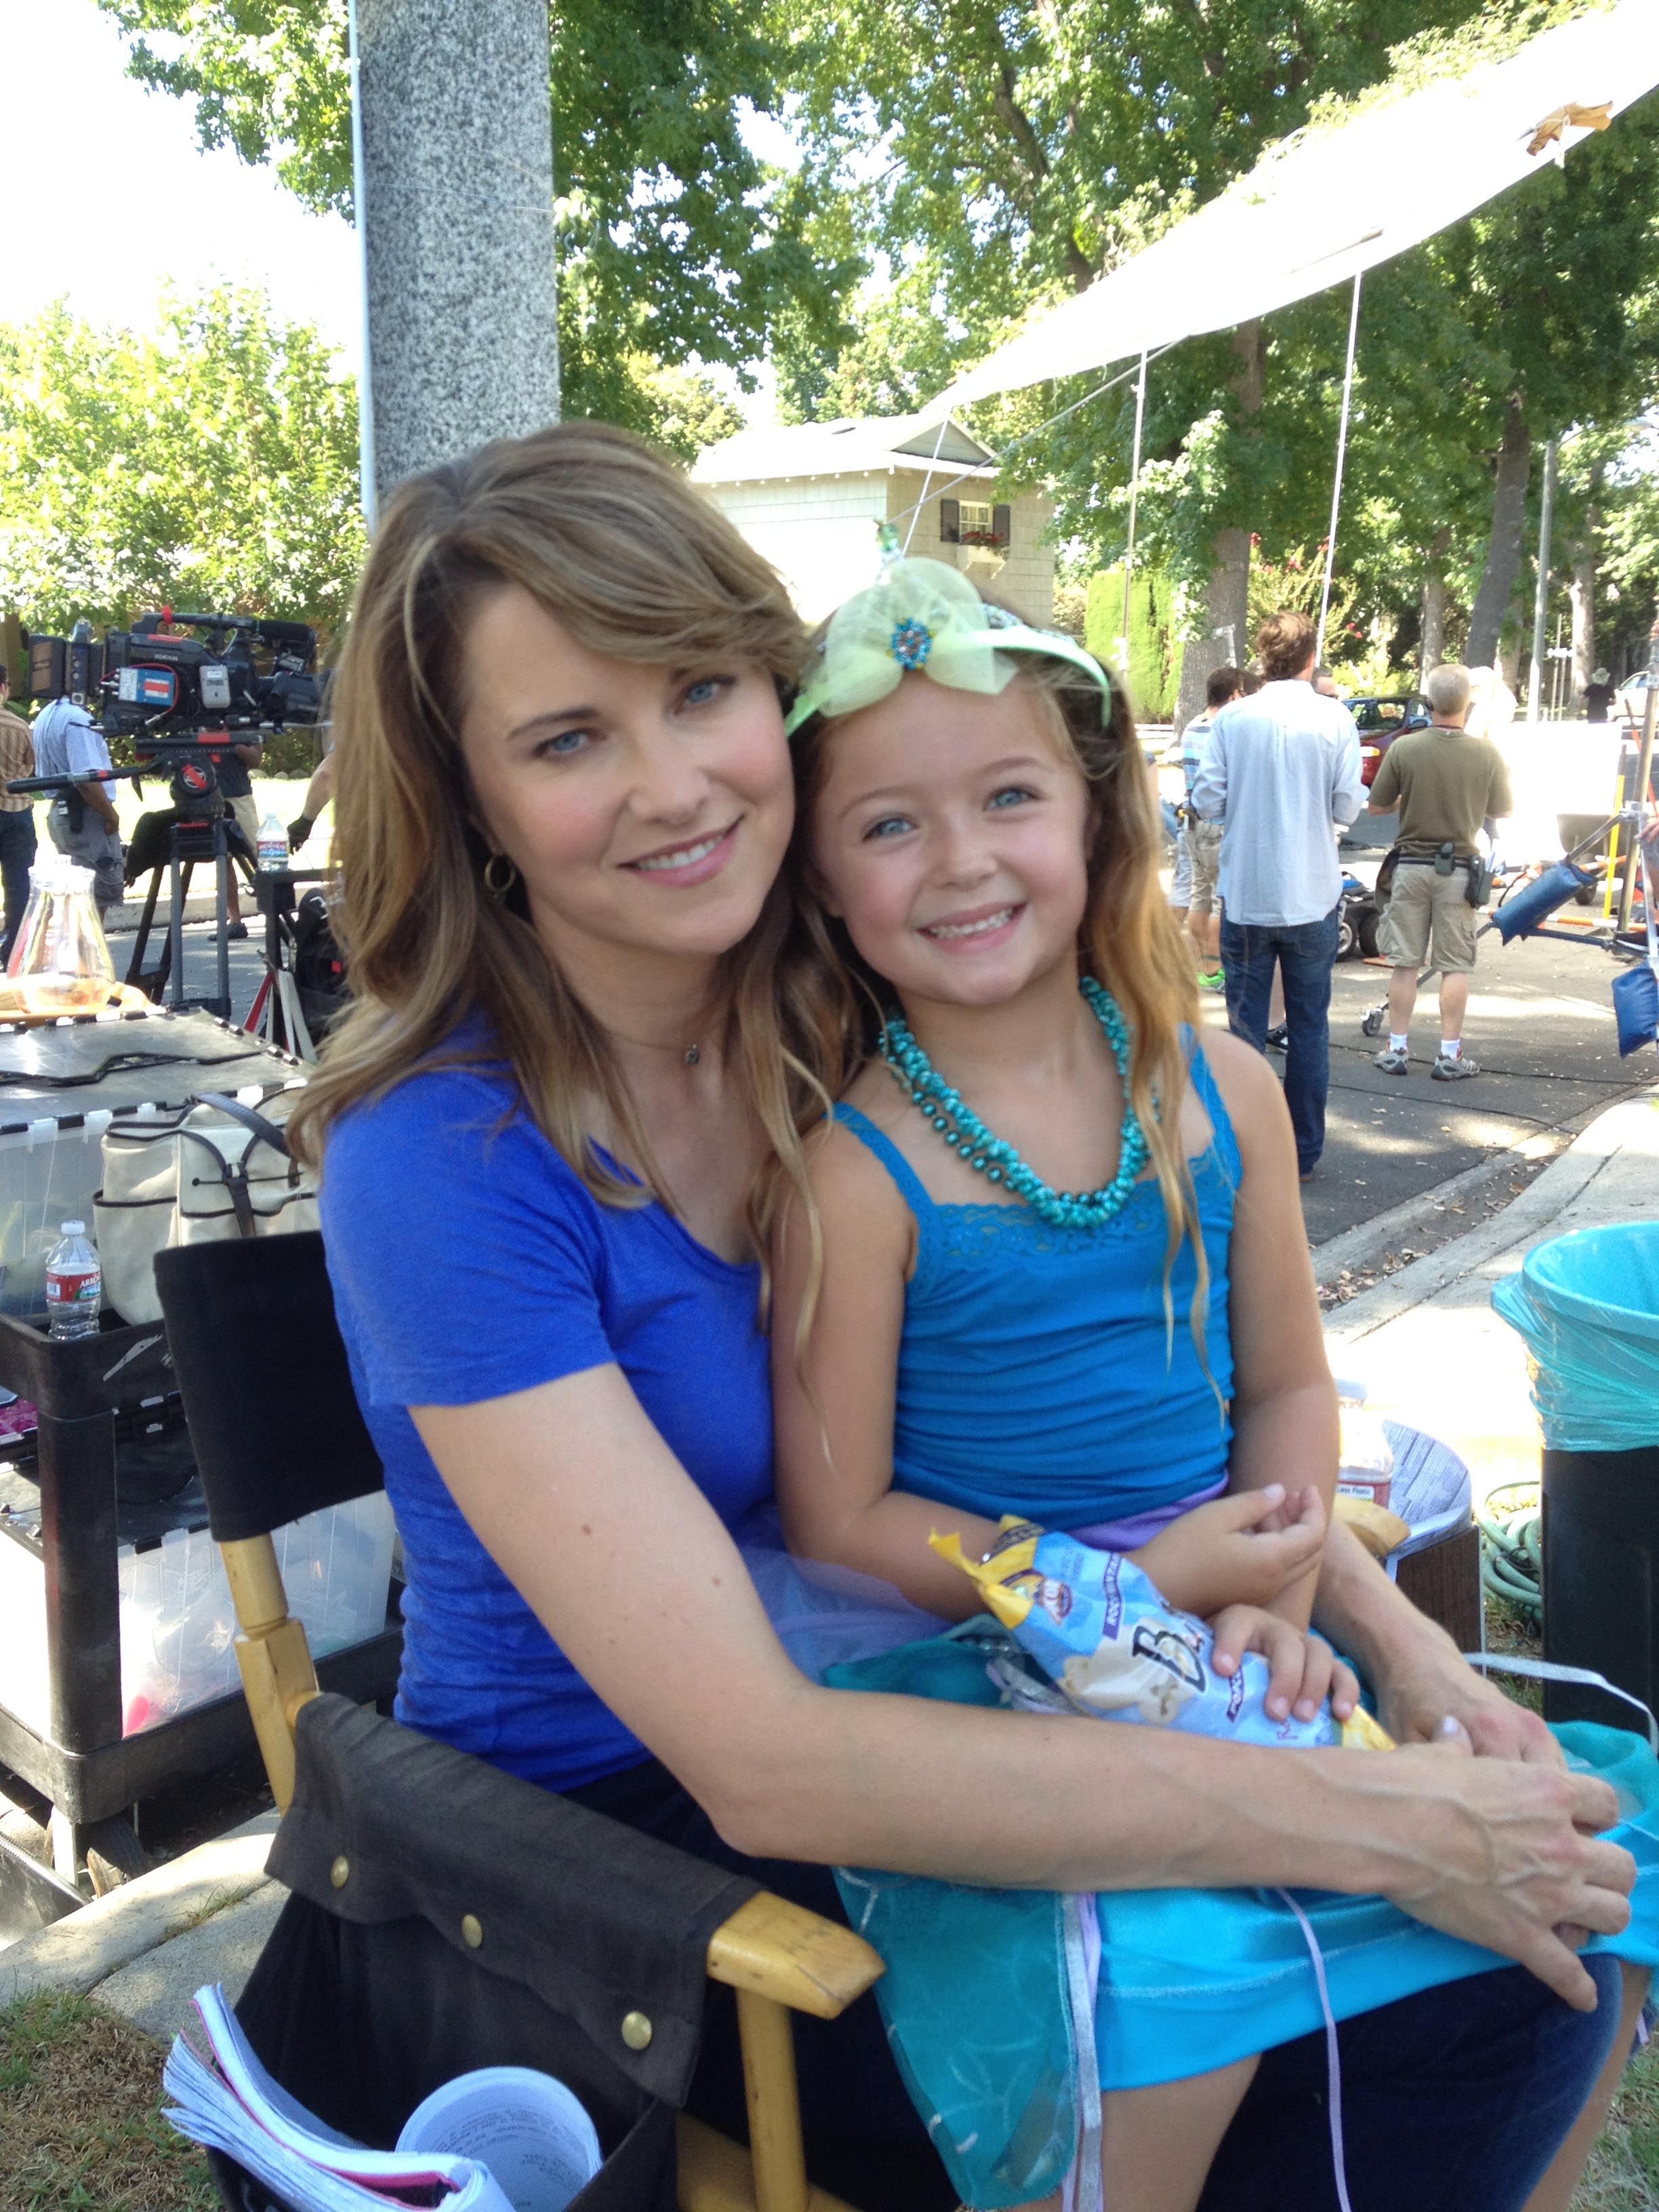 Rylan Lee & Lucy Lawless on set of Parks & Recreation